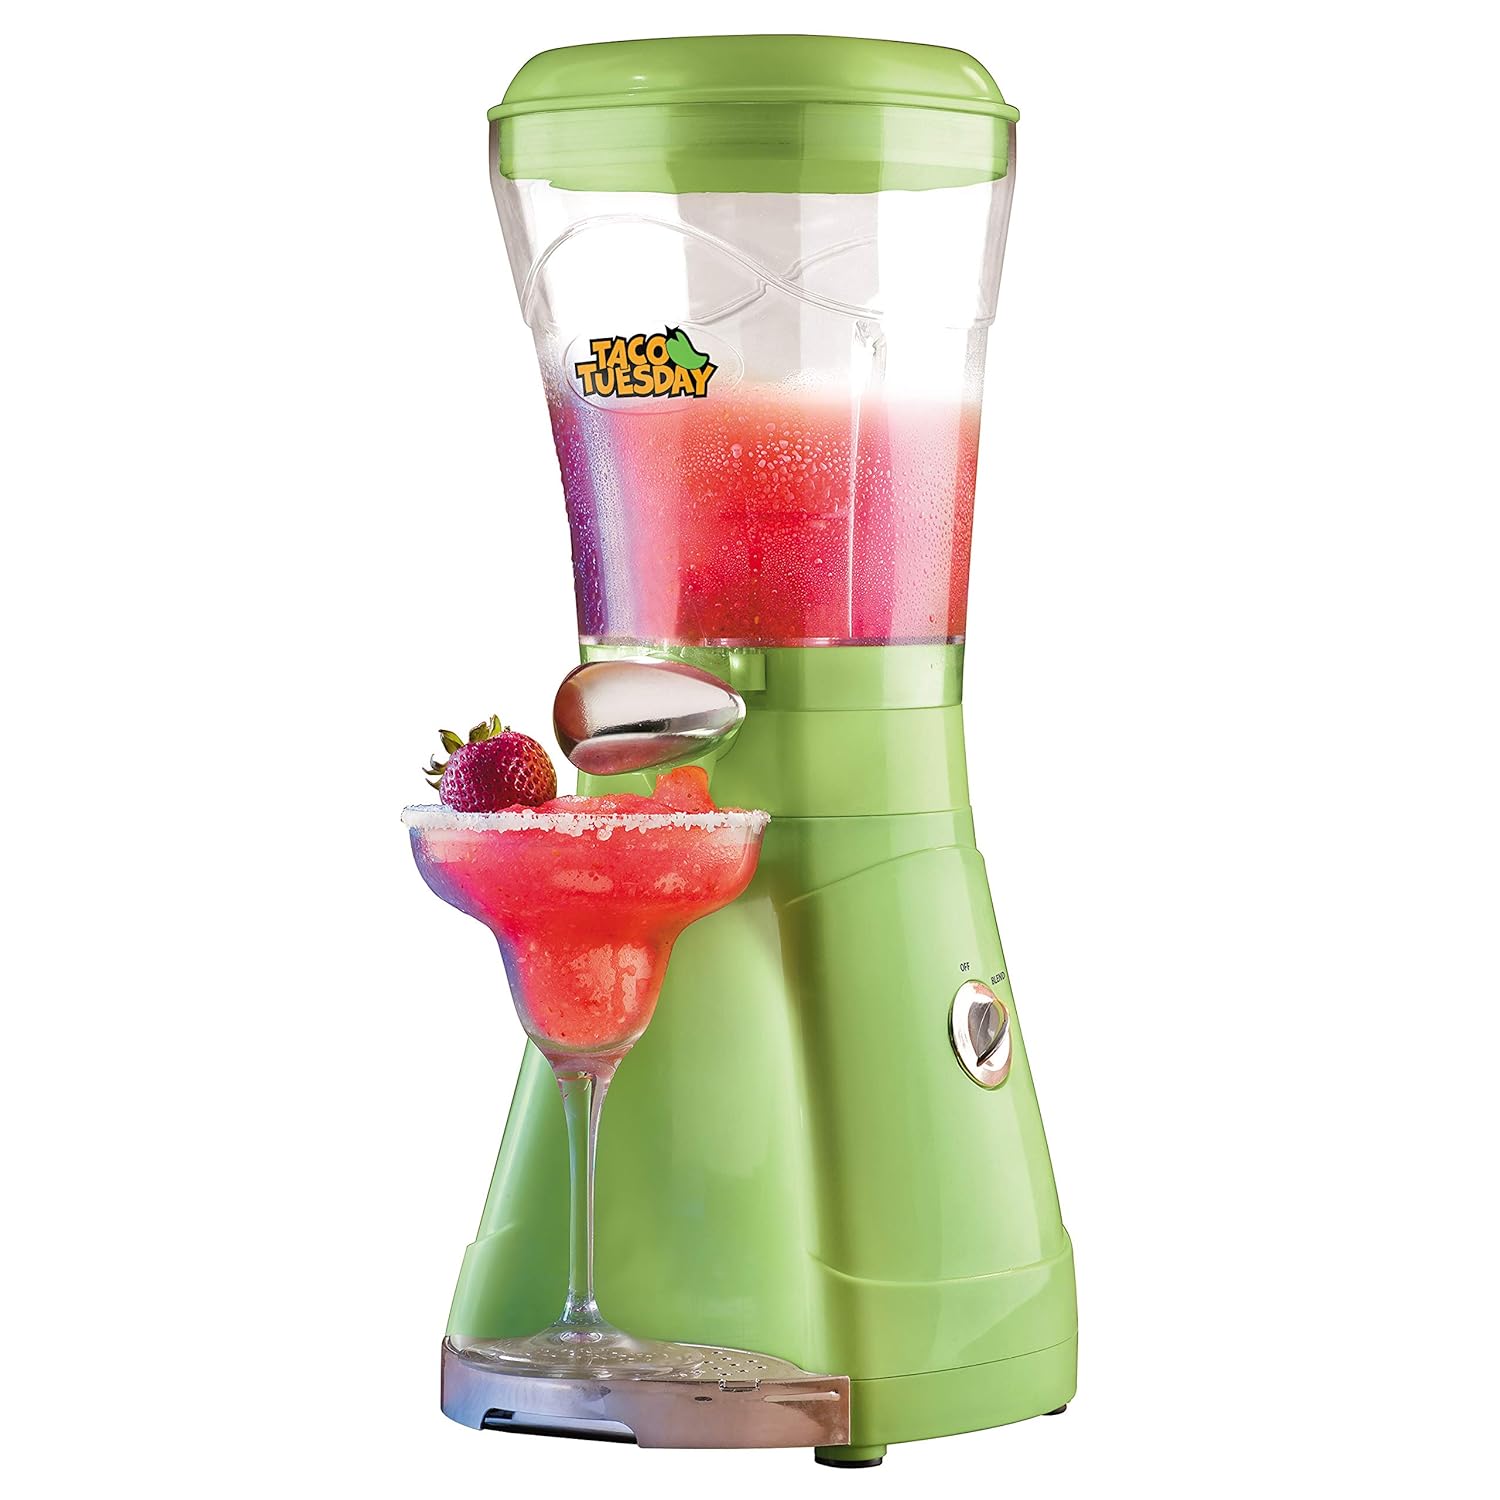 Great Choice Product Taco Tuesday Frozen Drink Maker And Margarita Machine For Home - 64-Ounce Slushy Maker With Stainless Steel Flow Spout - Easy…